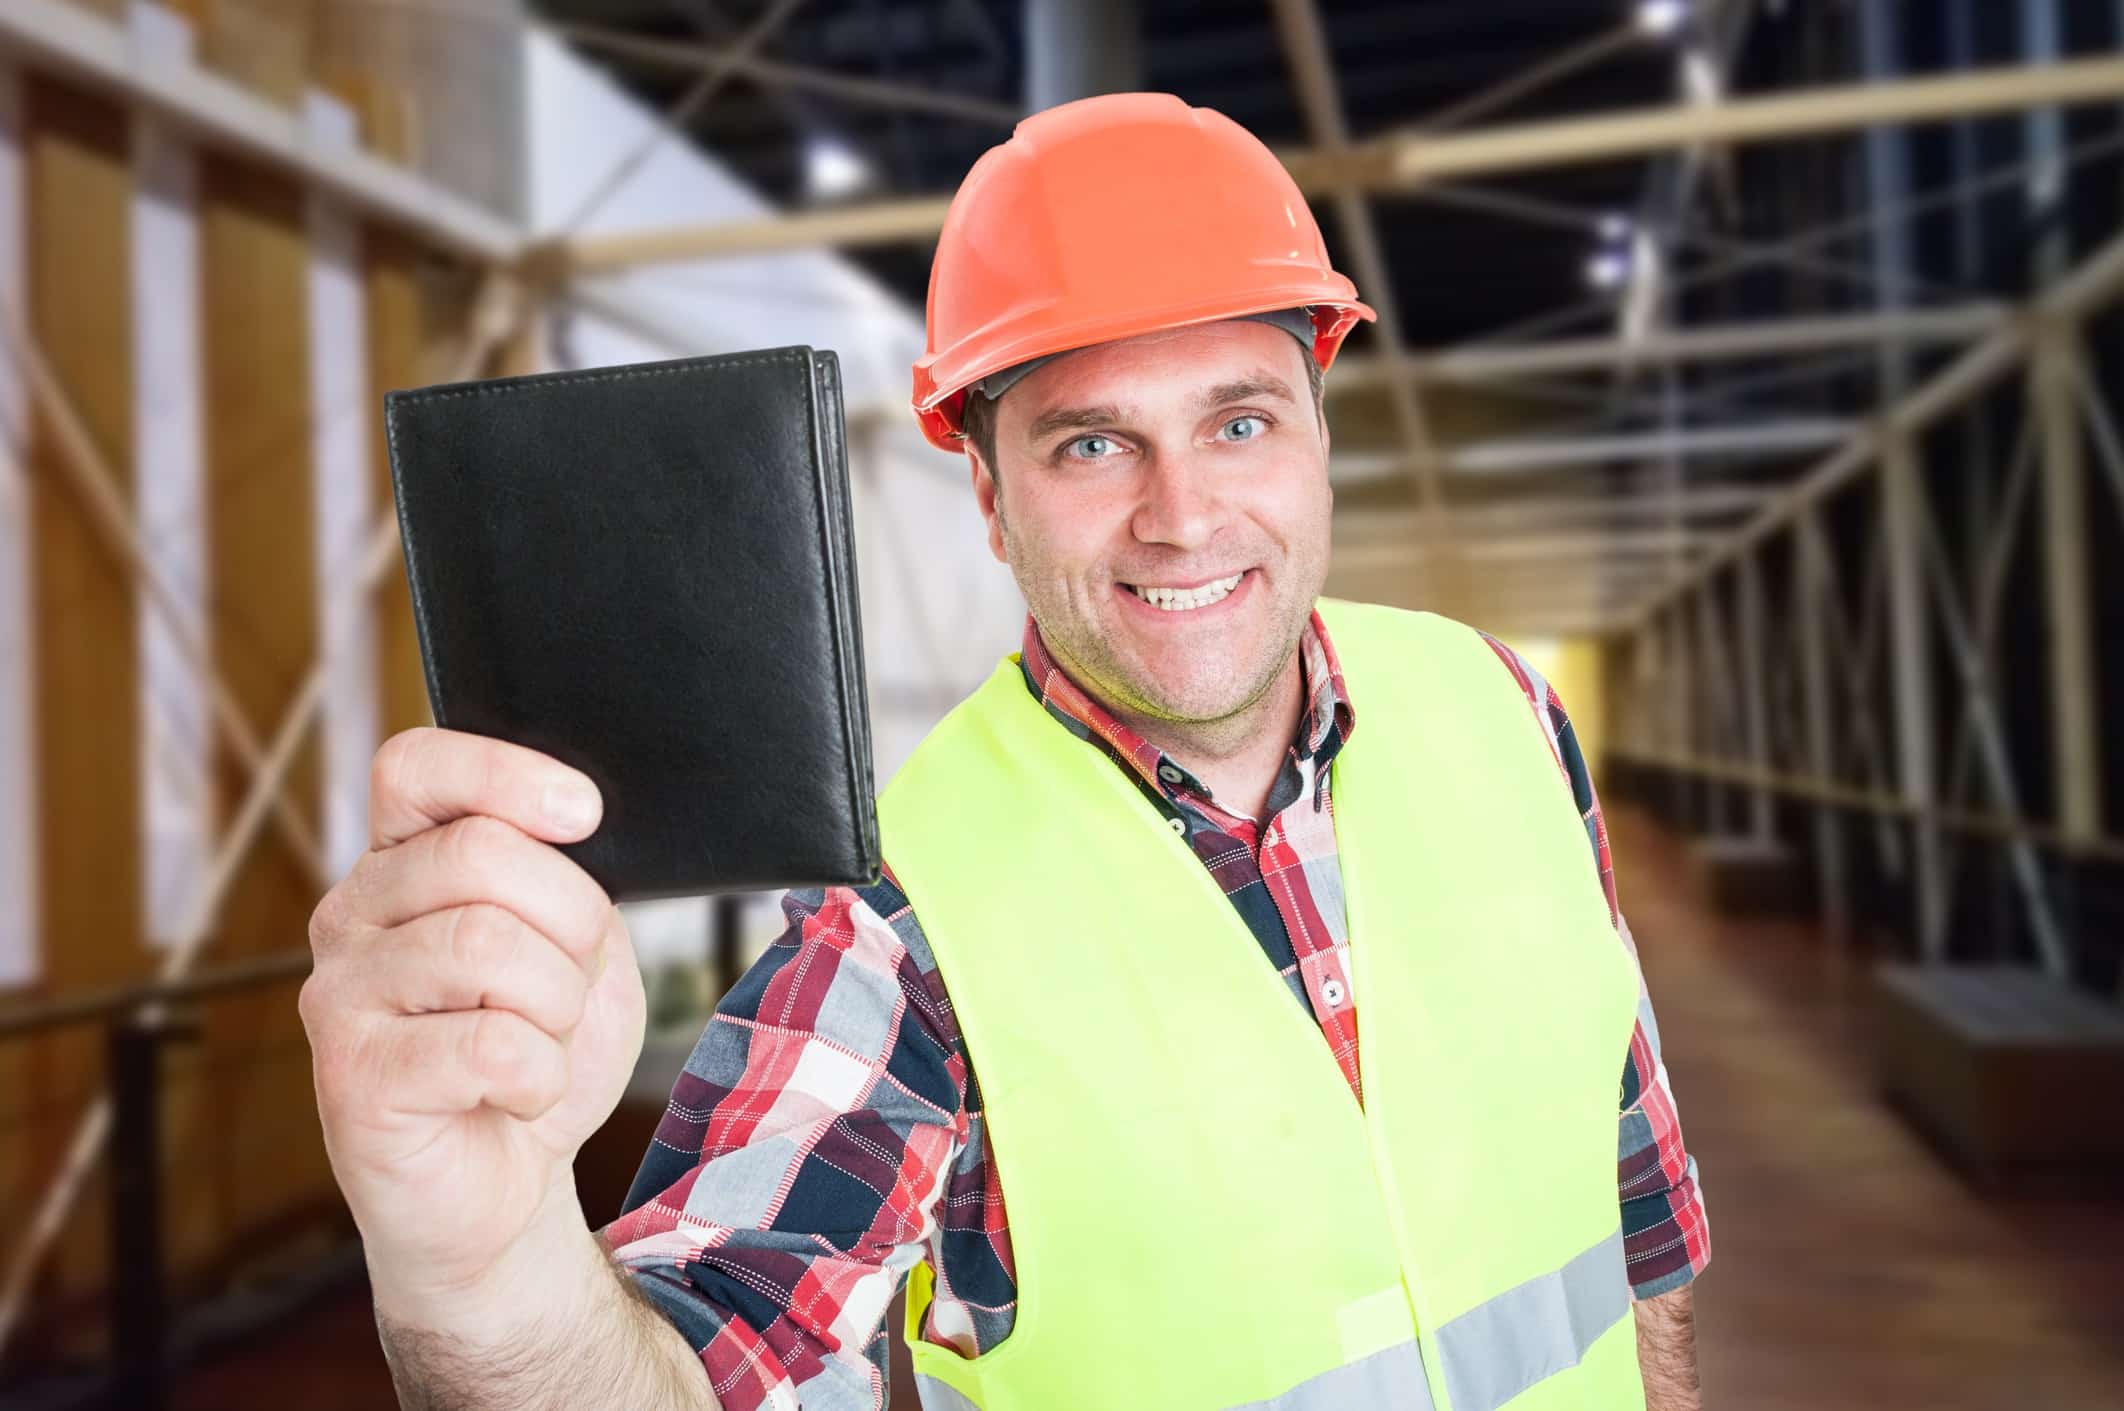 Contractor showing off wallet